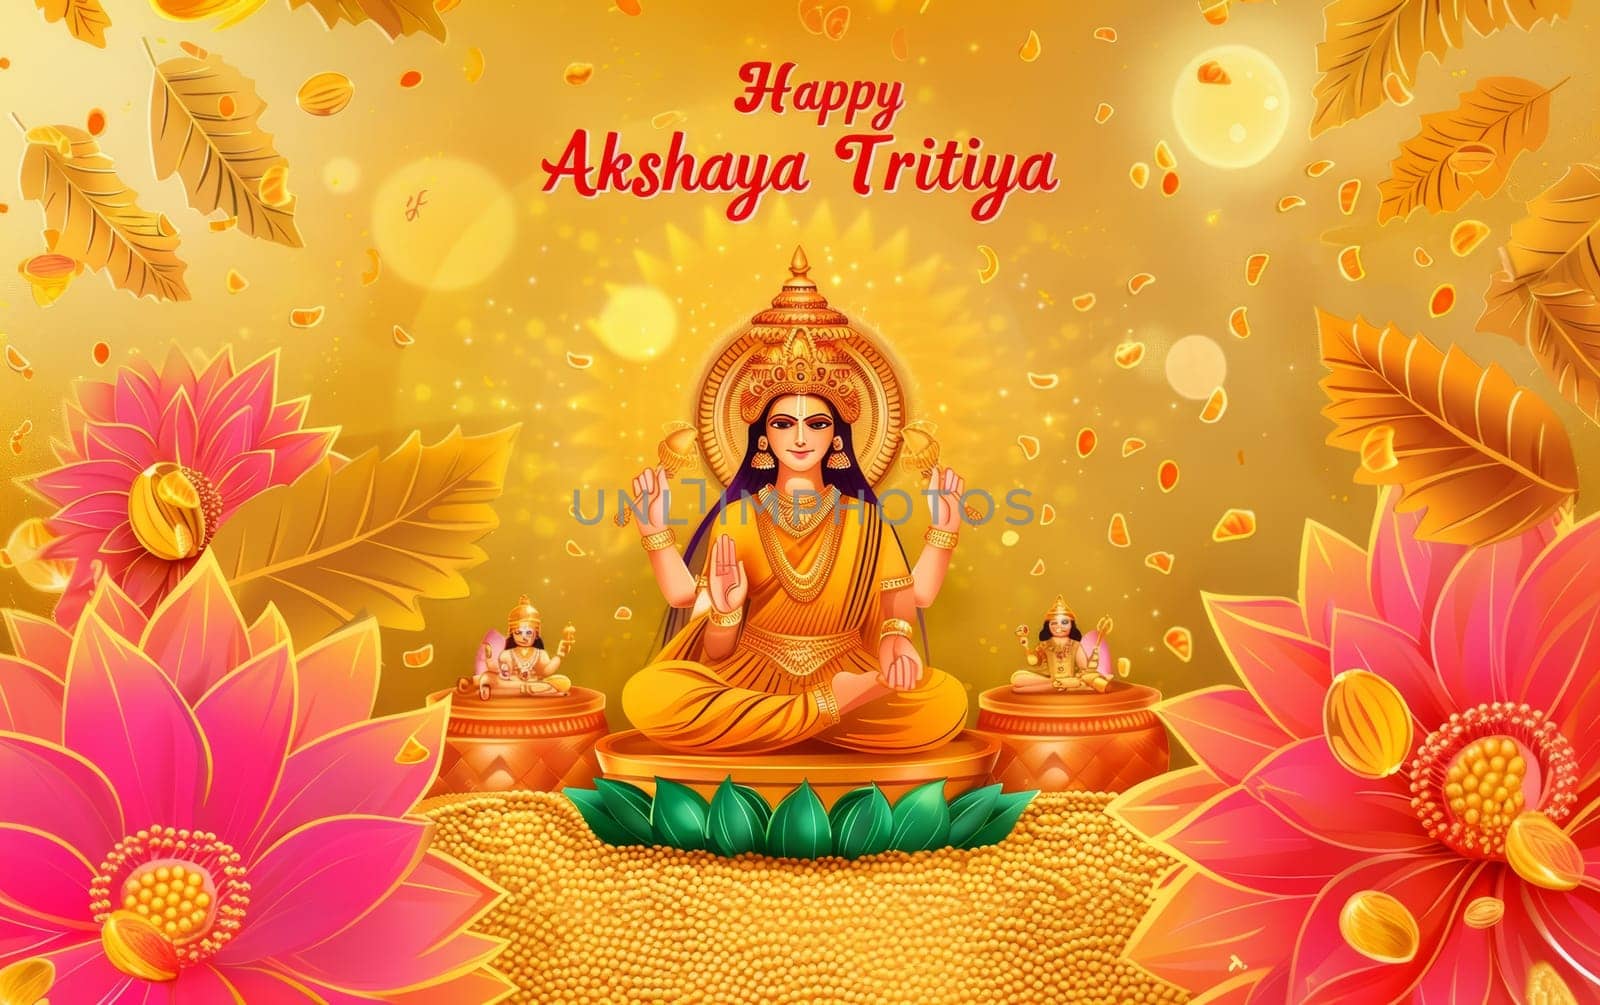 A warm Akshaya Tritiya greeting depicting Goddess Lakshmi with rice bowls and attendant deities on a glowing golden background. by sfinks